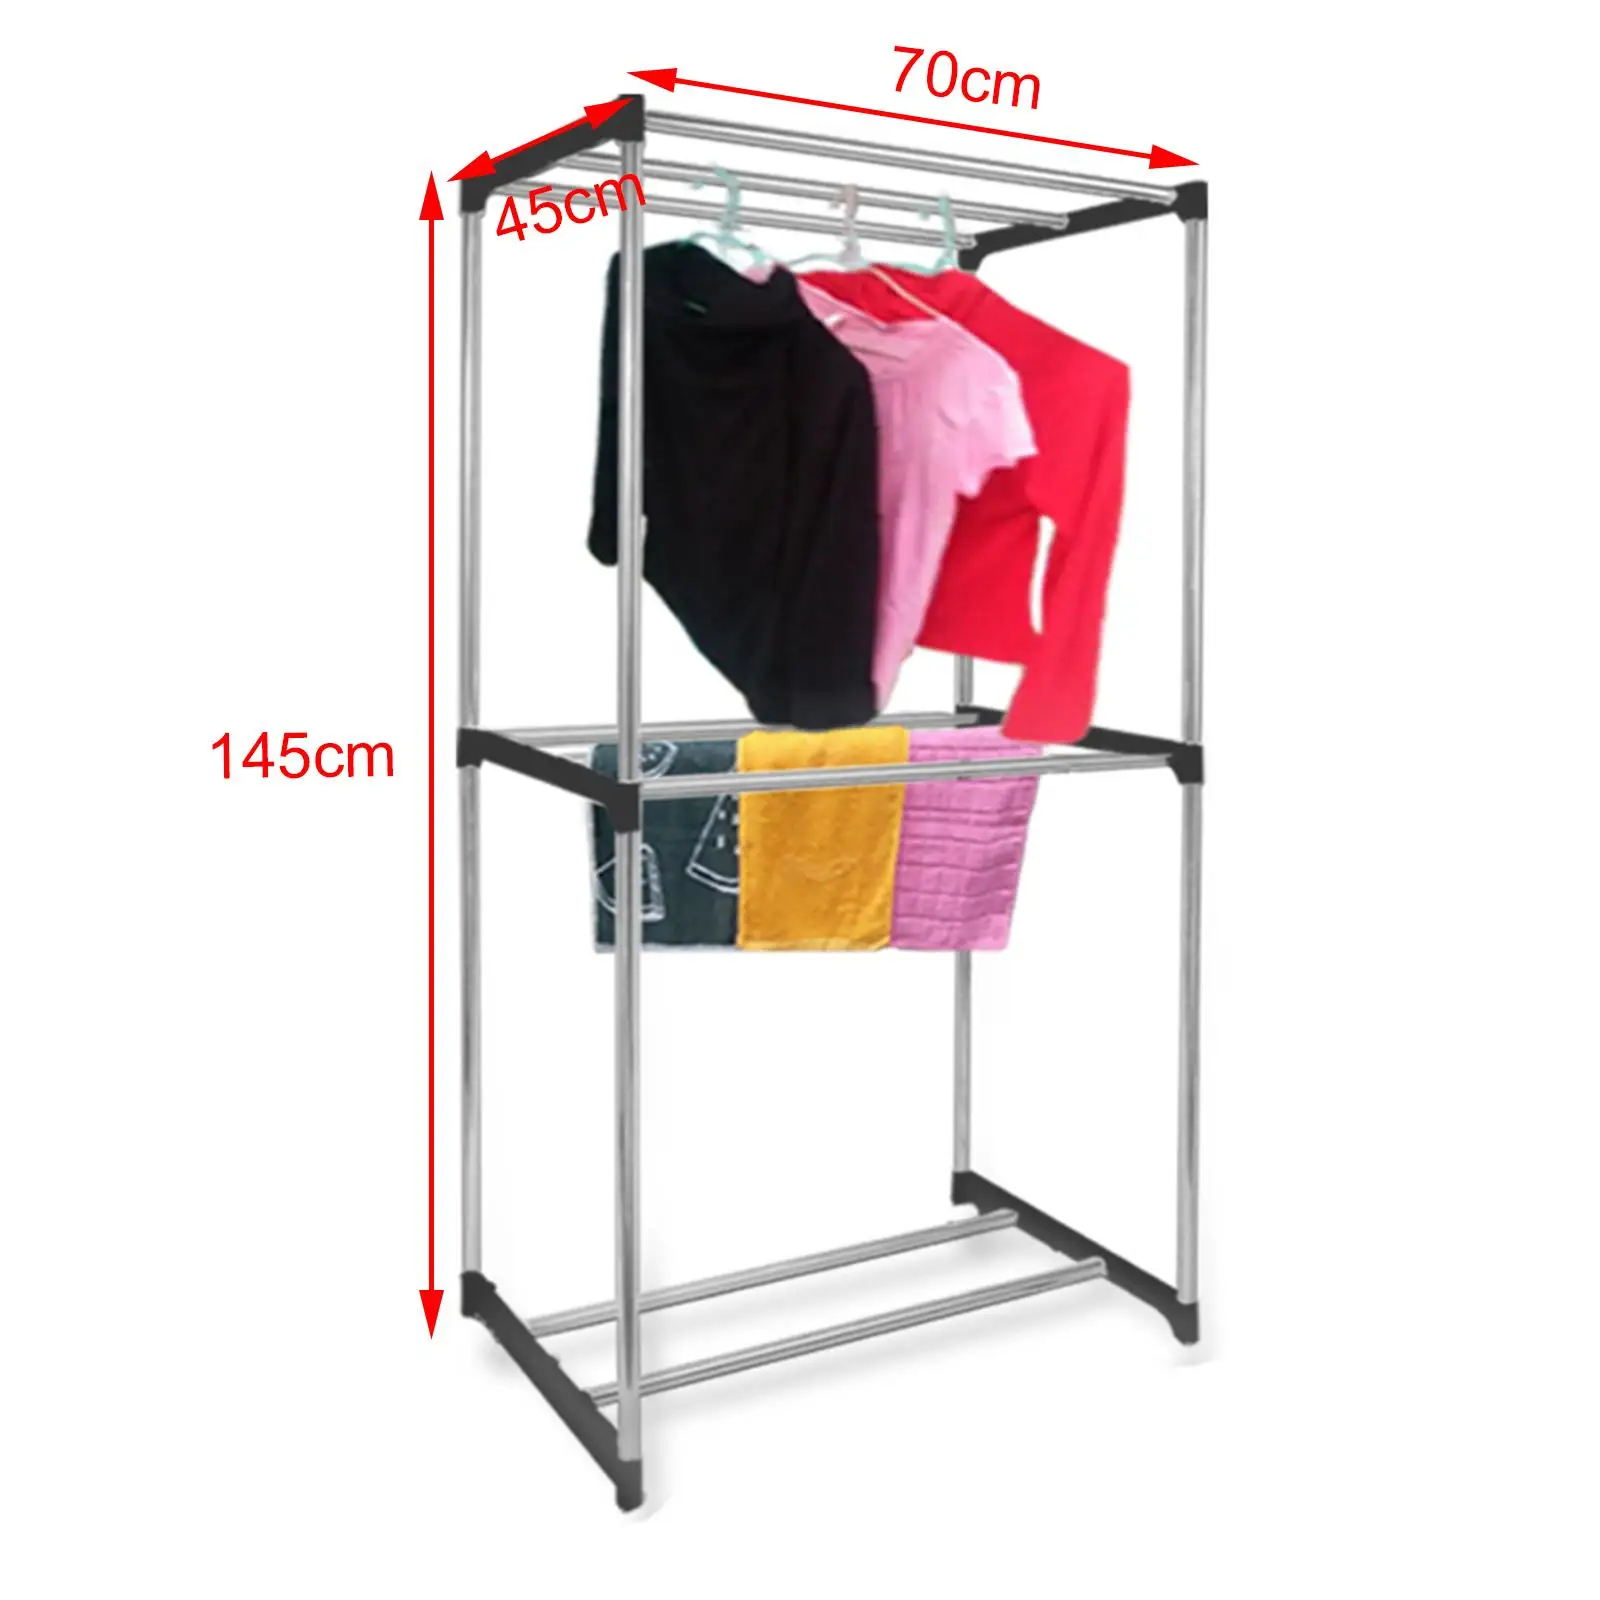 Laundry Clothes Storage Drying Rack Clothes Horses Rack Clothes Dryer Organizer Laundry Garment Dryer Stand for Balcony